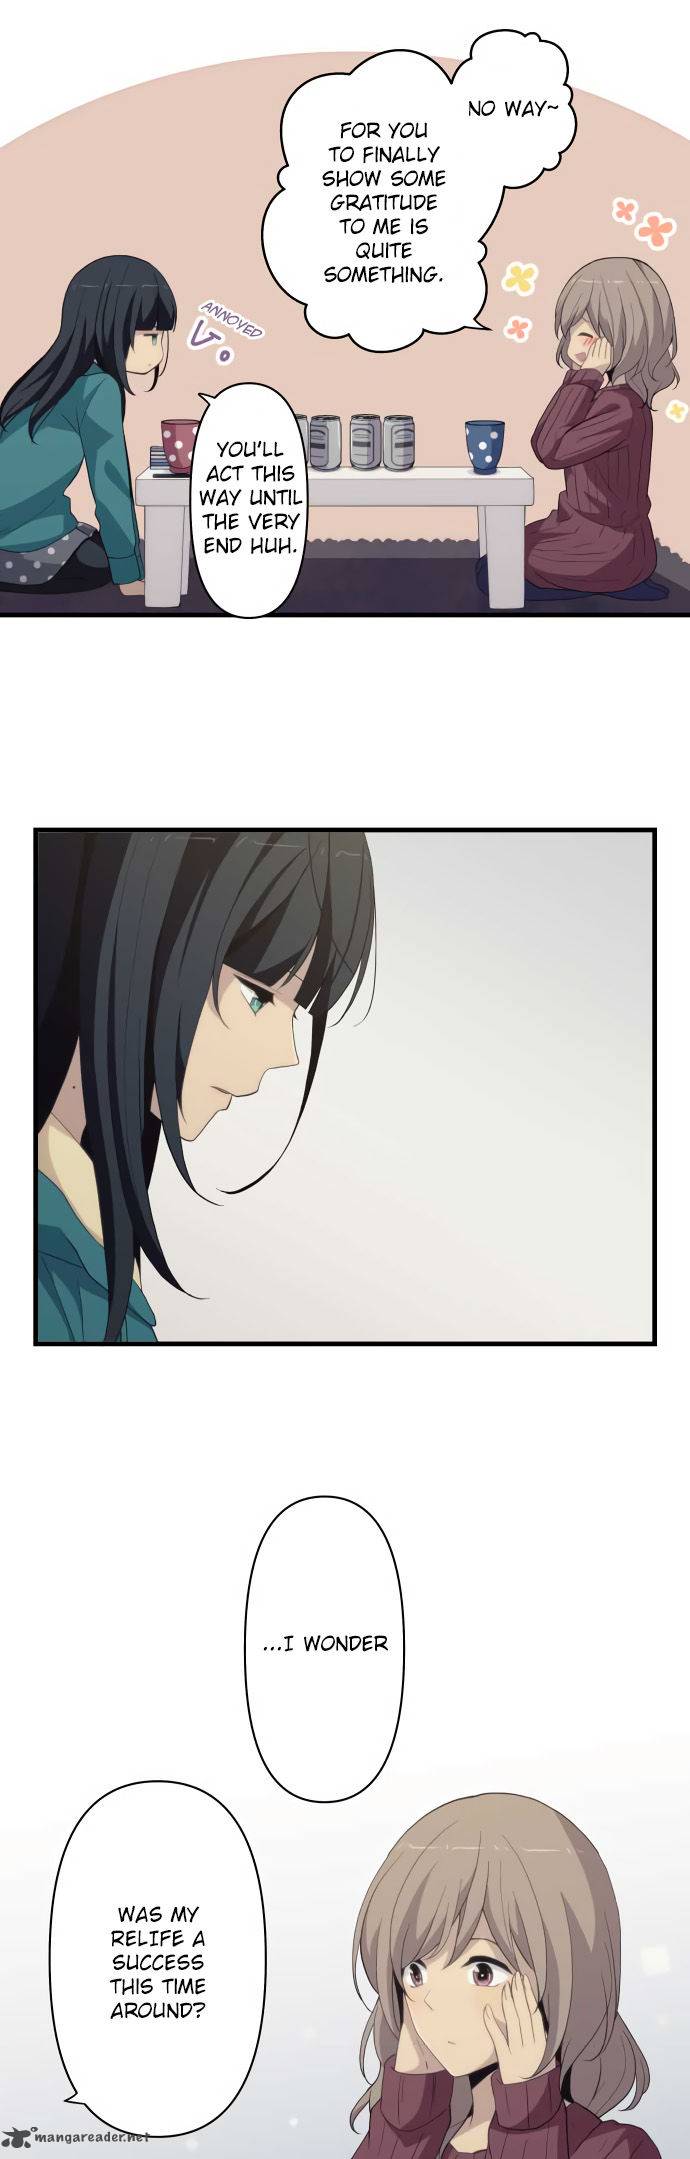 relife_215_2